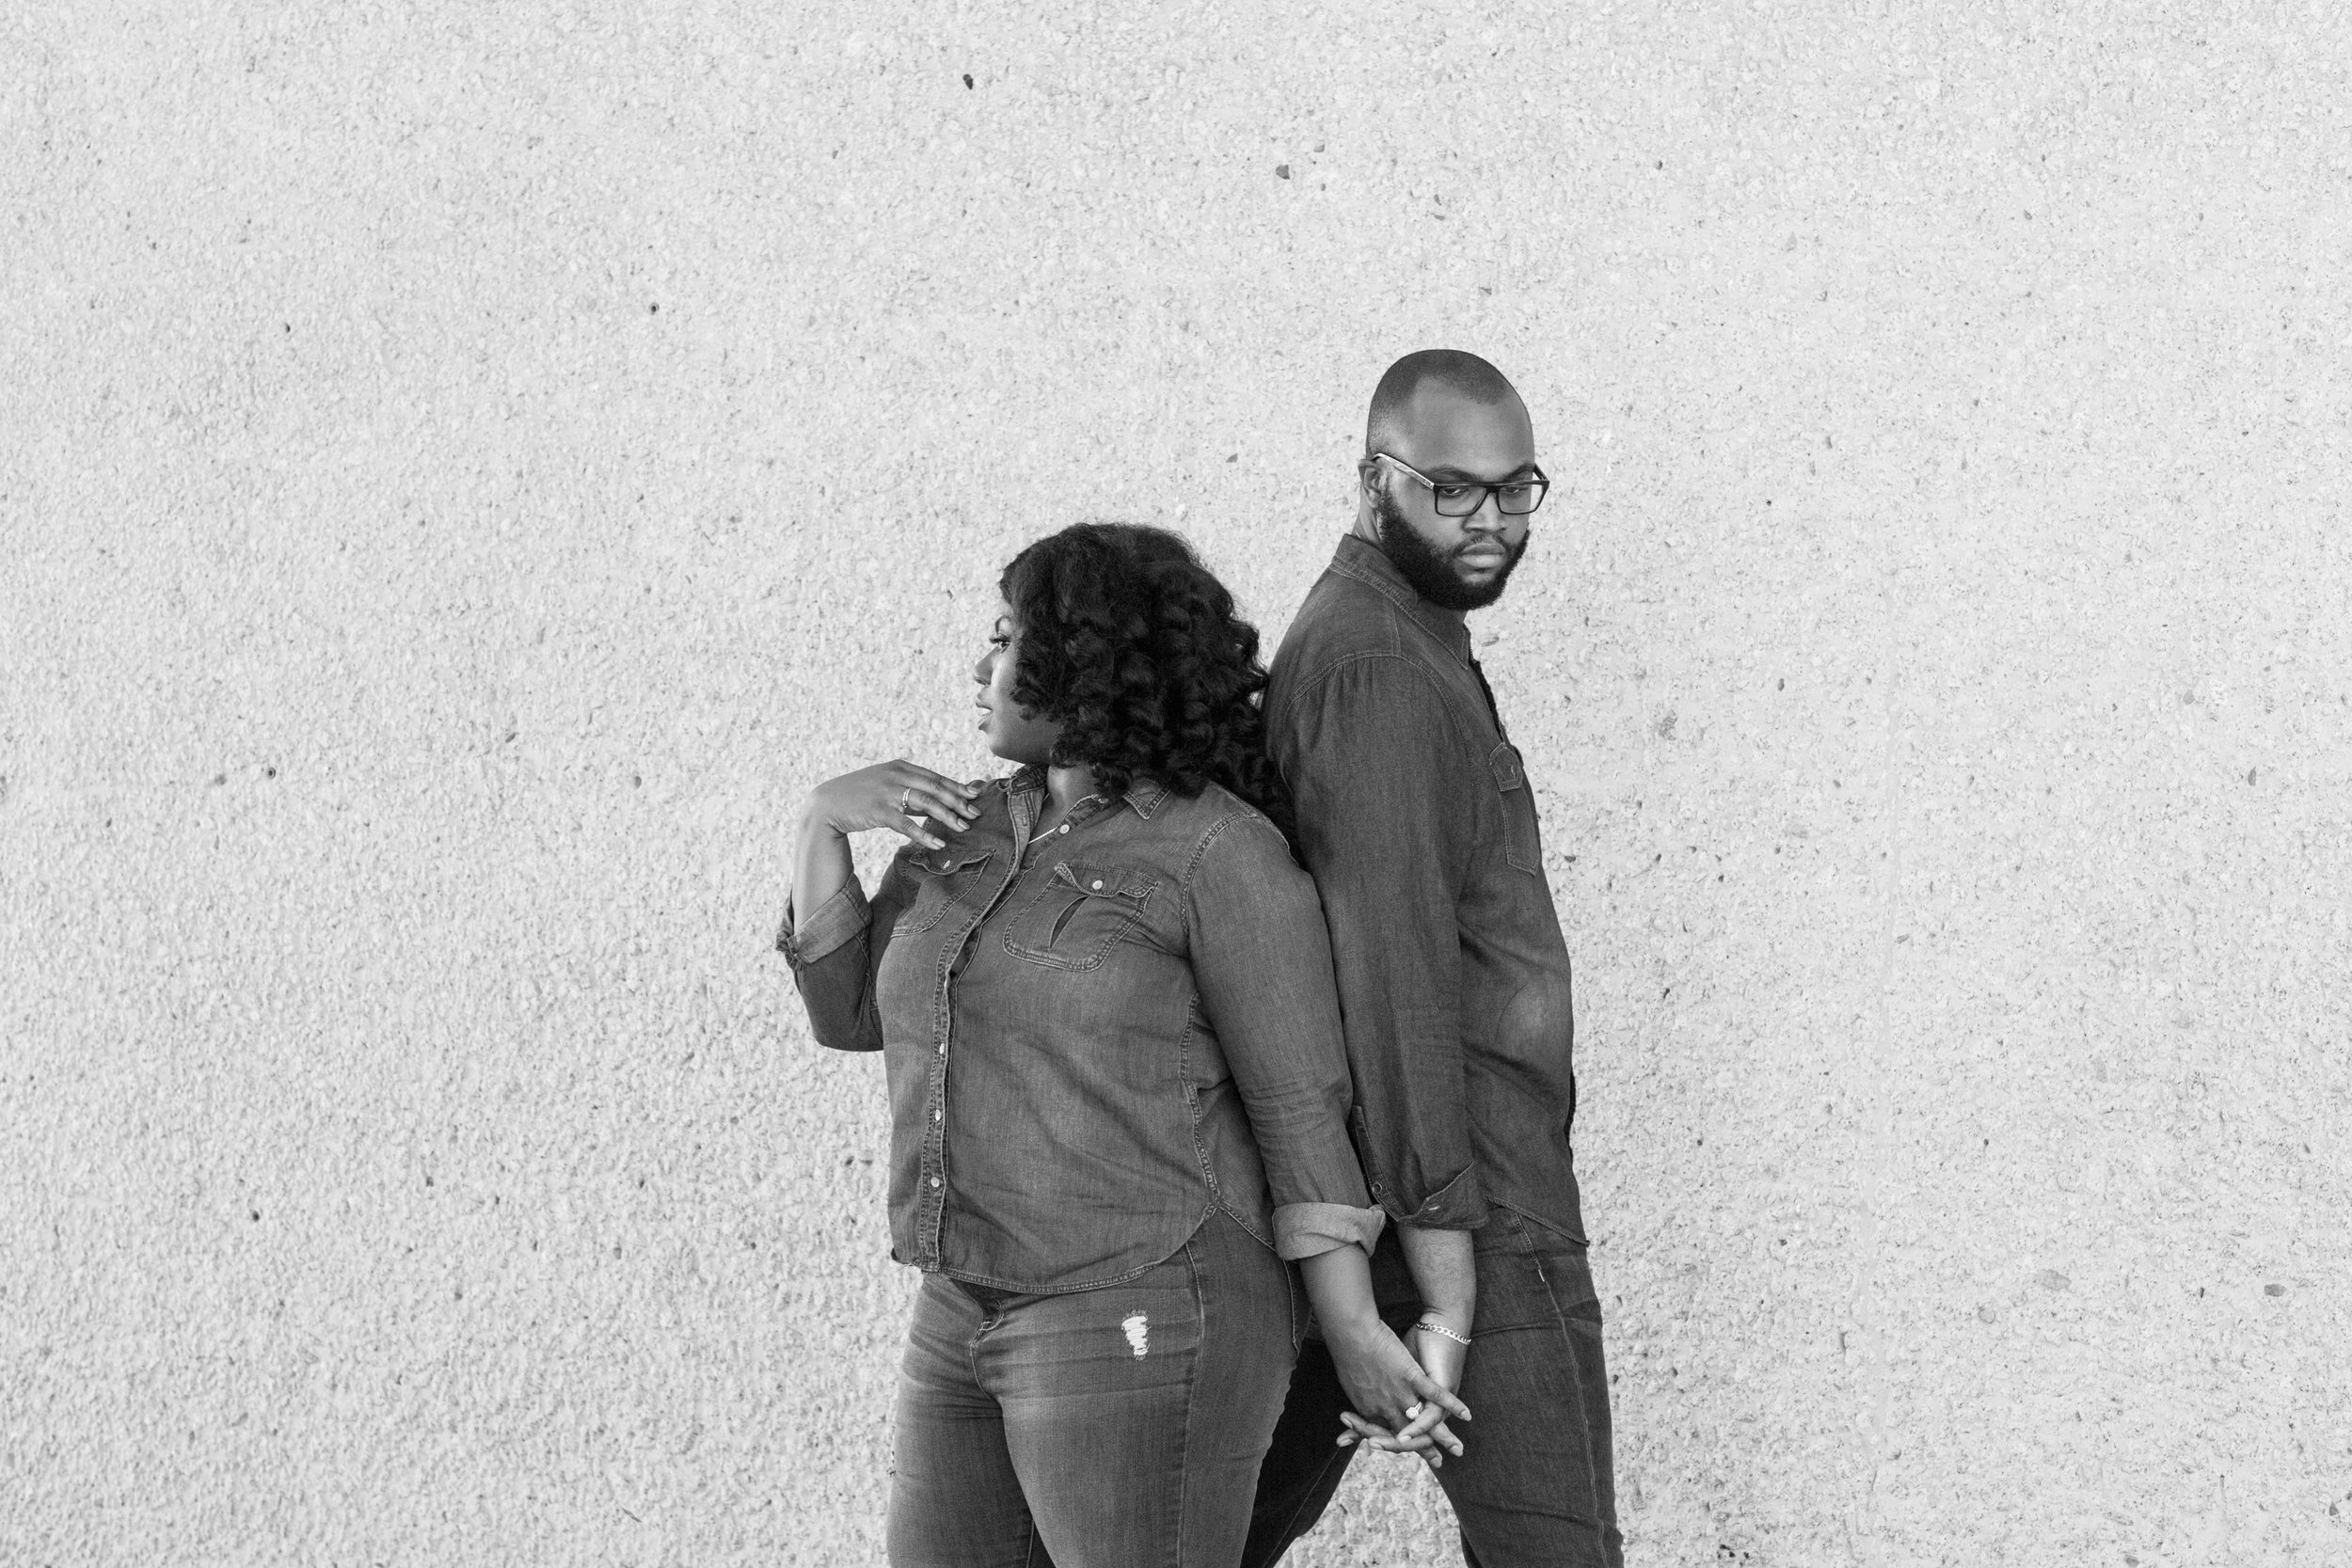 DC Engagement Session at th Hishhorn Museum-7.jpg